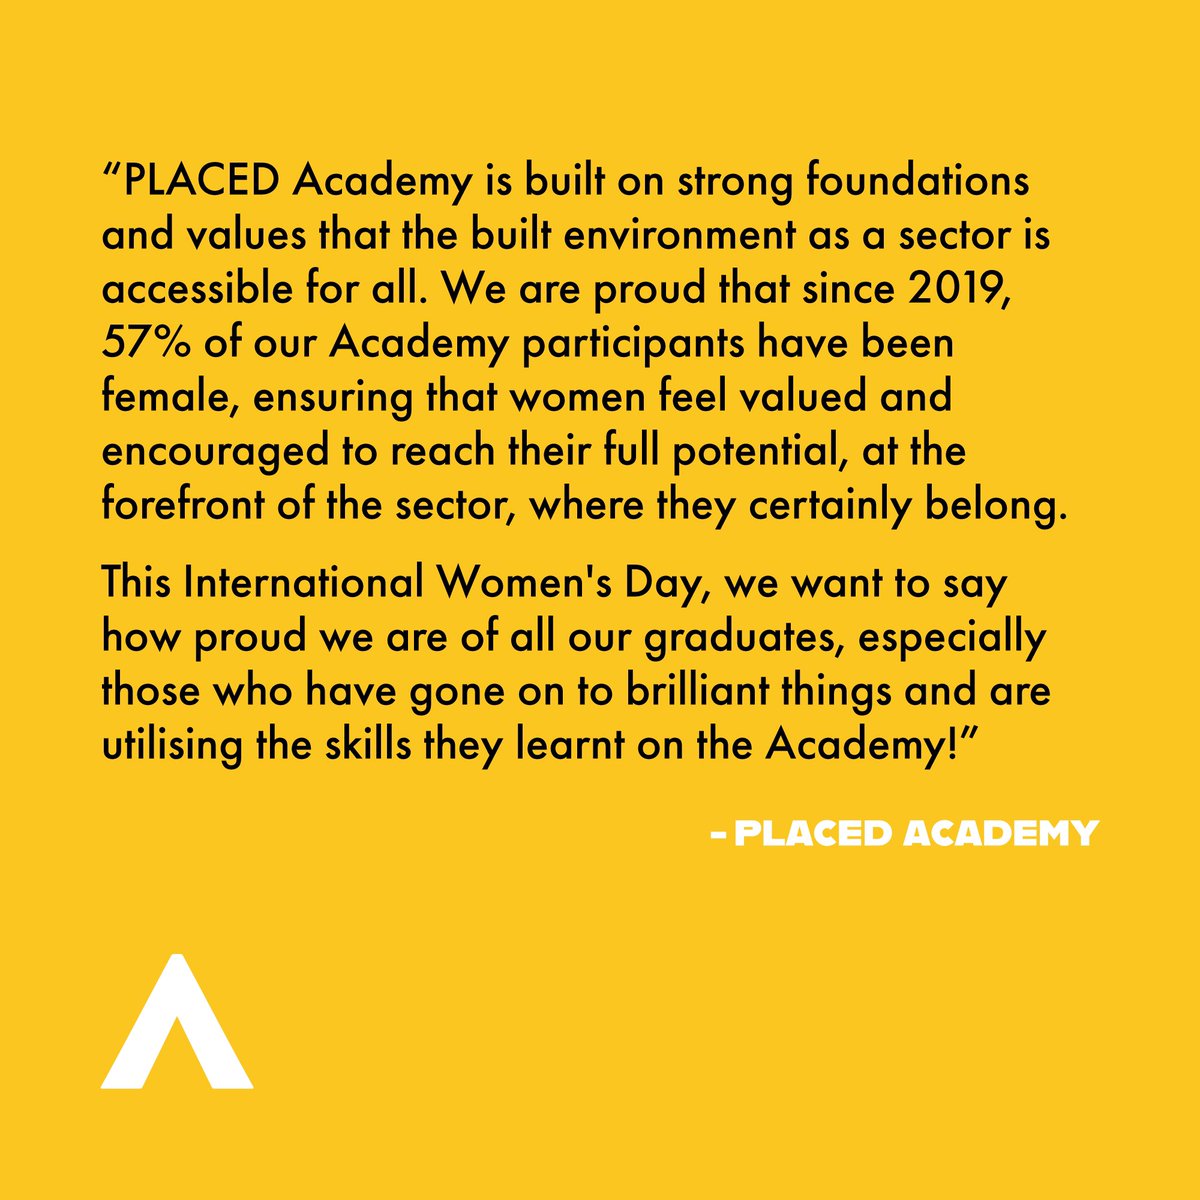 HAPPY INTERNATIONAL WOMEN’S DAY, from the #PLACEDAcademy team! 👏 #PLACED #IWD #IWD24